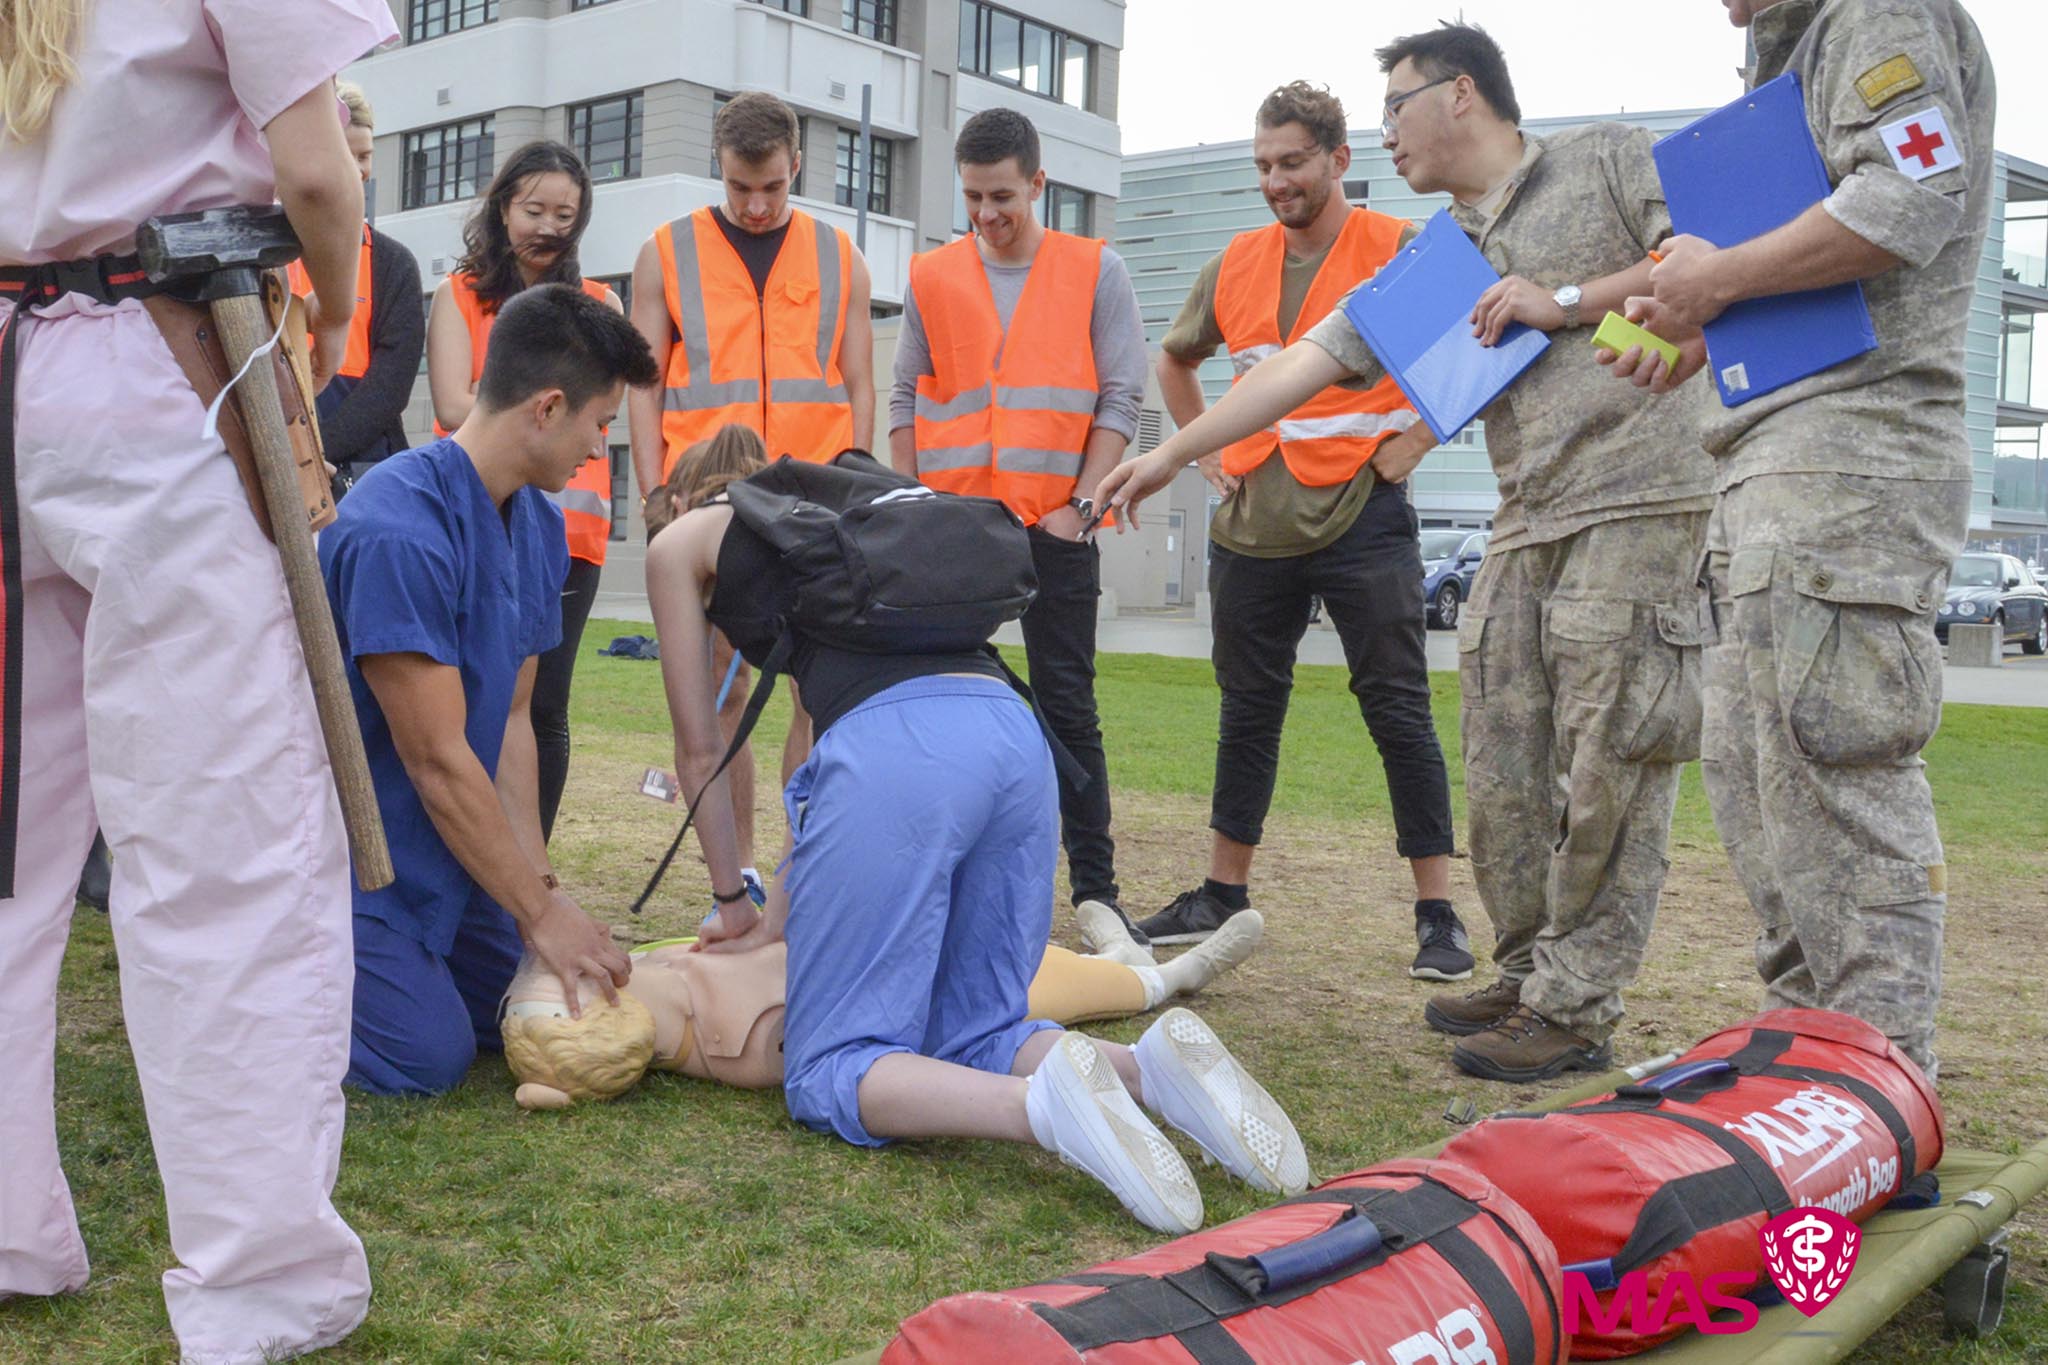 NZ Medical students teams outdoors rescue CPR